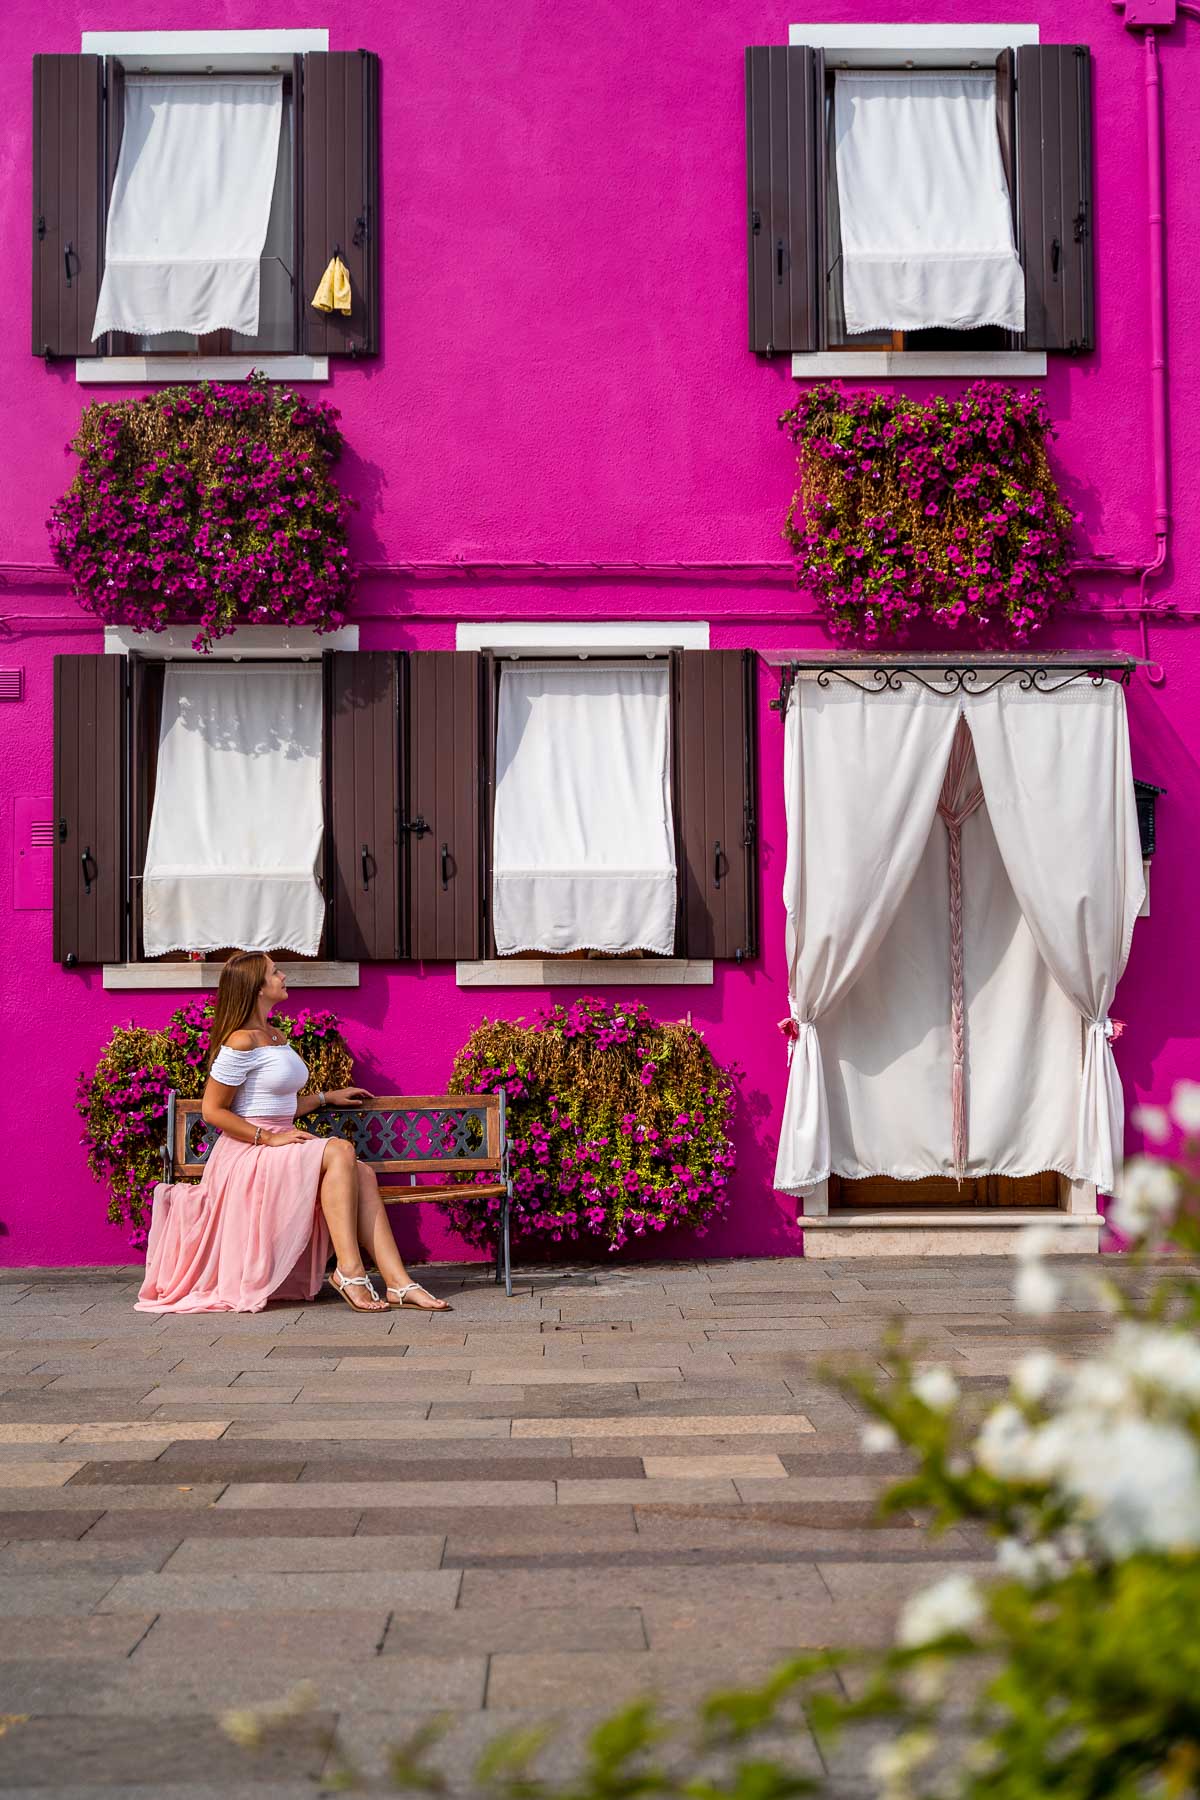 Girl in a pink skirt sitting in front of a pink house in Burano